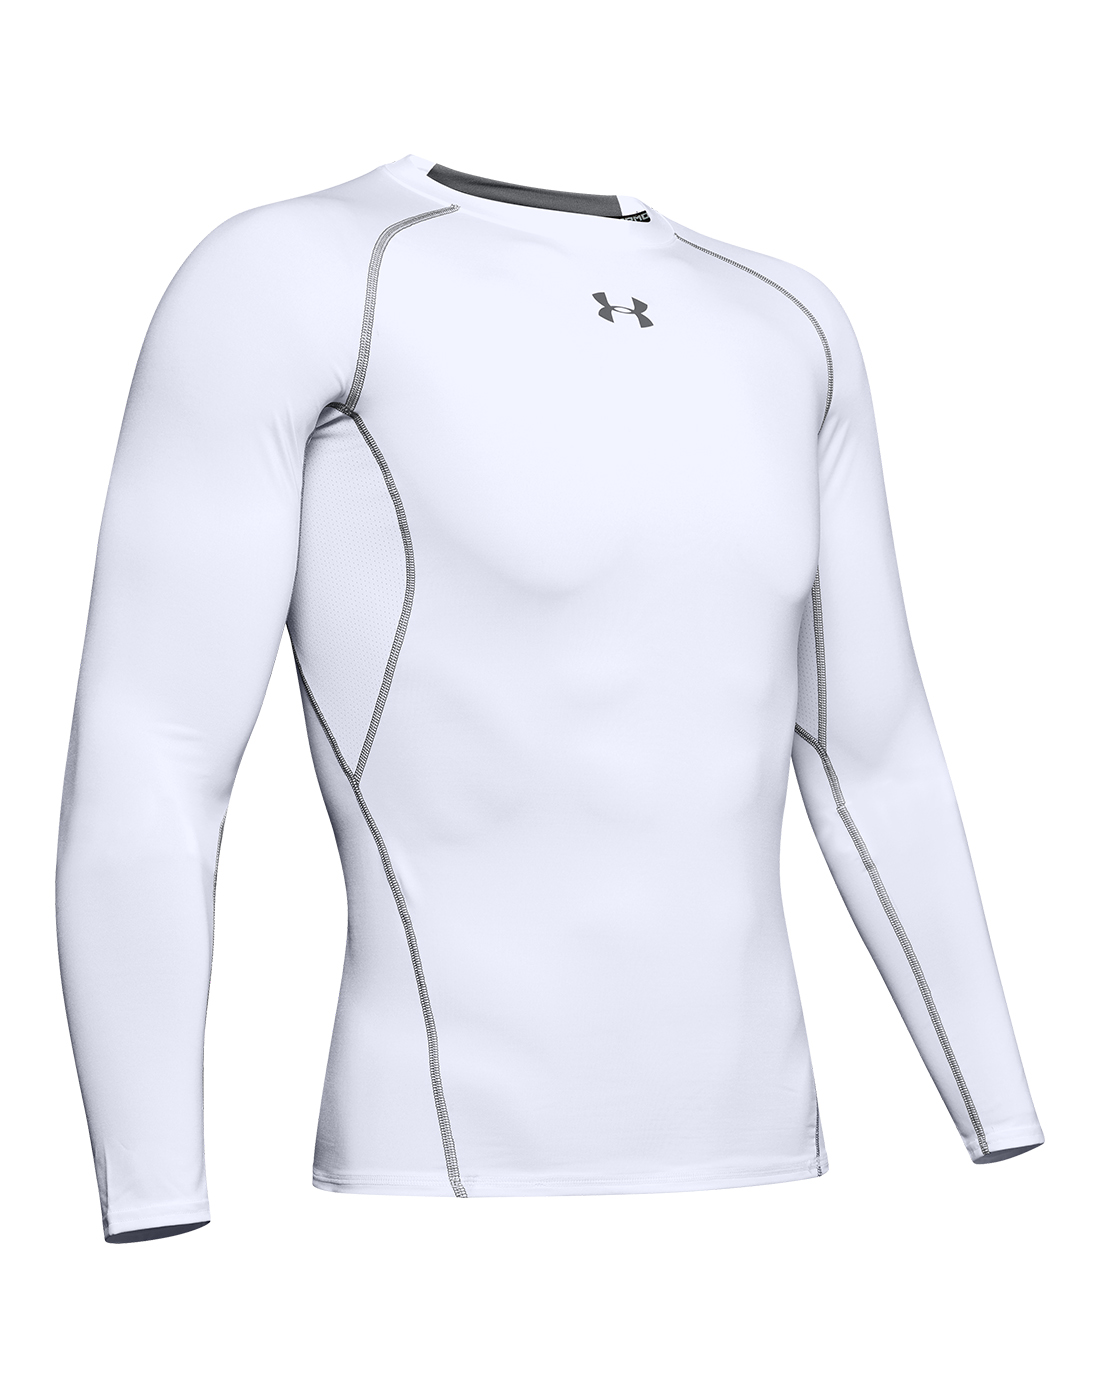 Men's White Under Armour Long Sleeve Base Layer | Life Style Sports